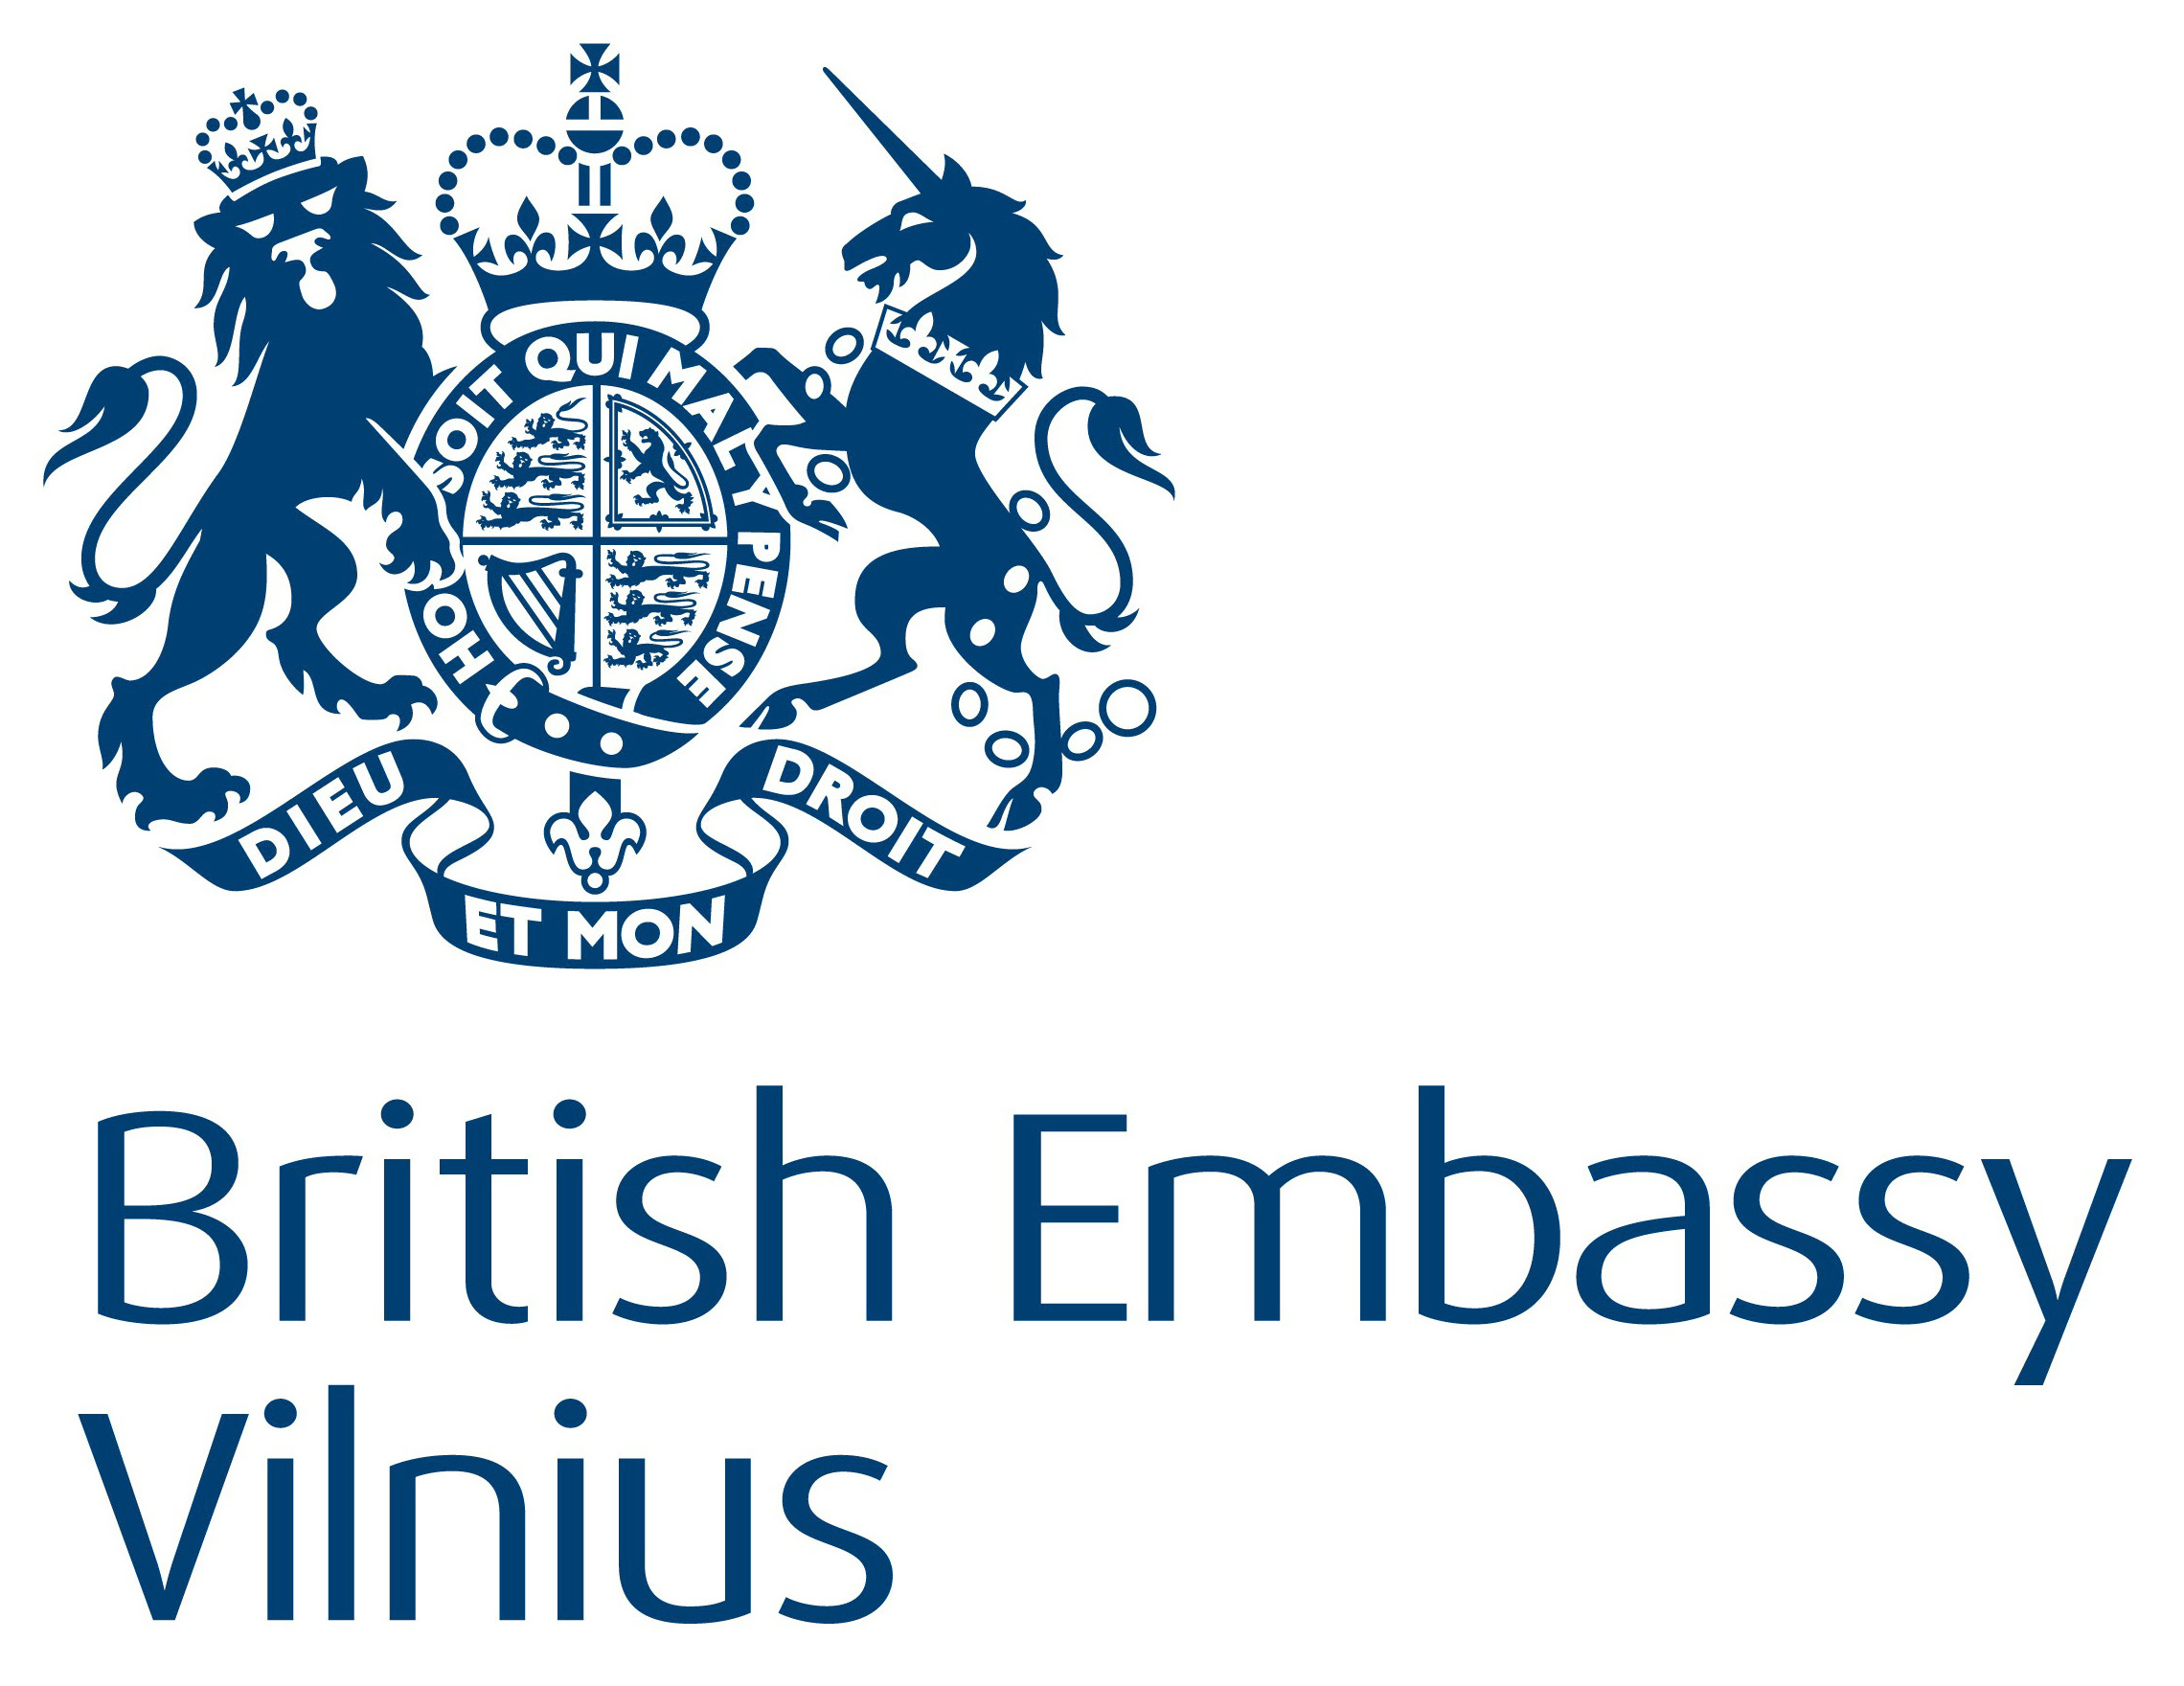 British Embassy in Lithuania